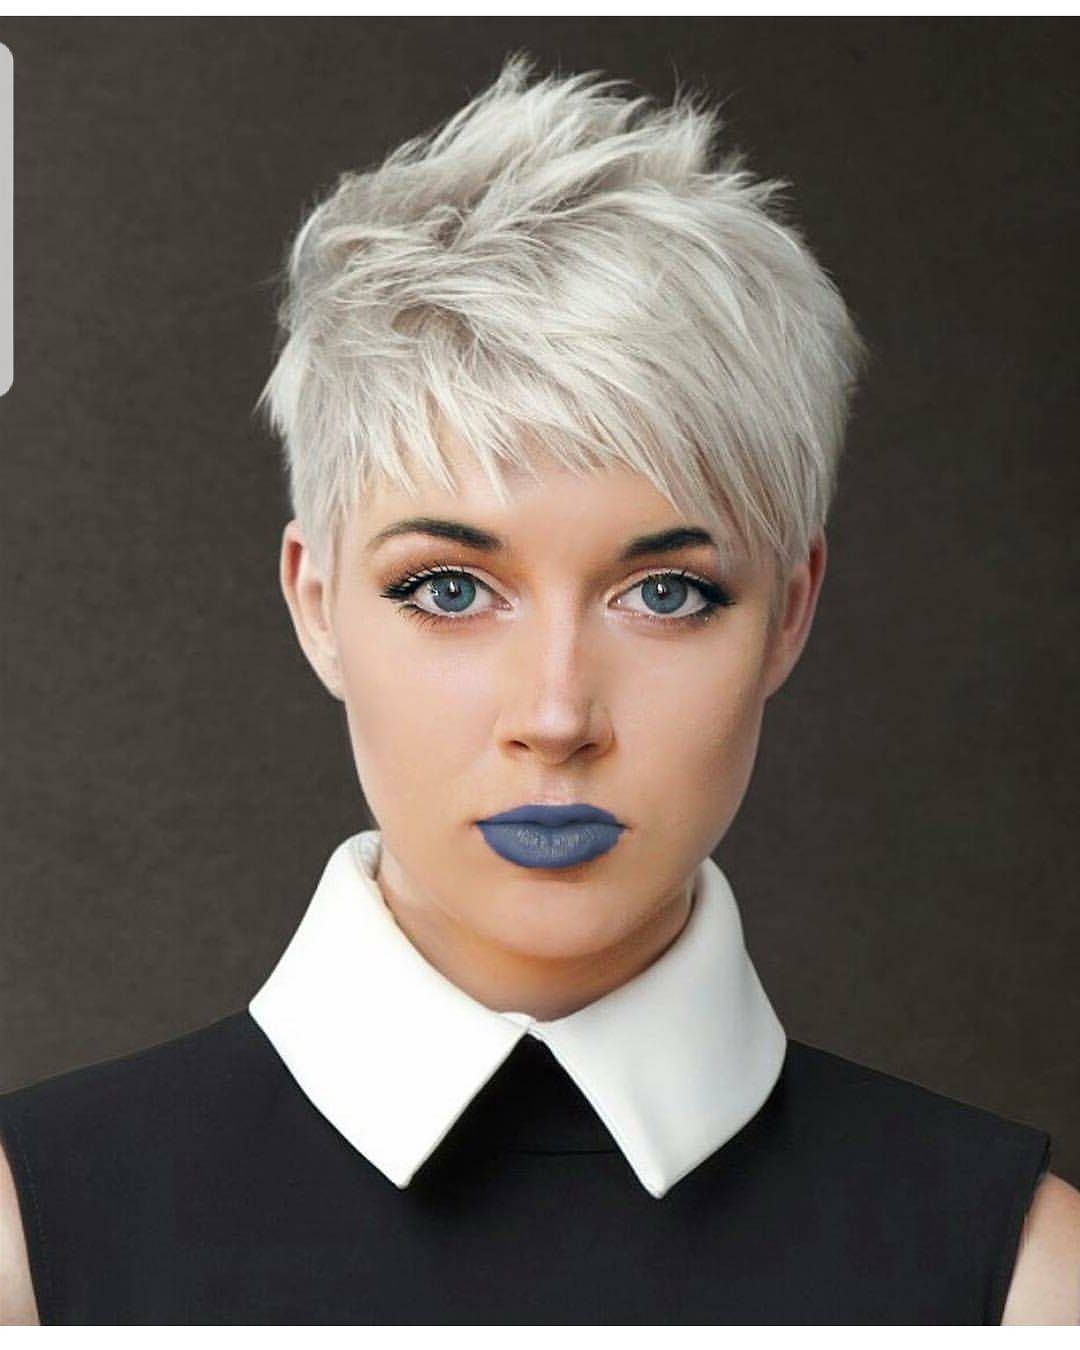 10 Easy Pixie Haircut Styles & Color Ideas, 2018 Women Short Hairstyles For 2018 Platinum Pixie Haircuts (View 8 of 15)